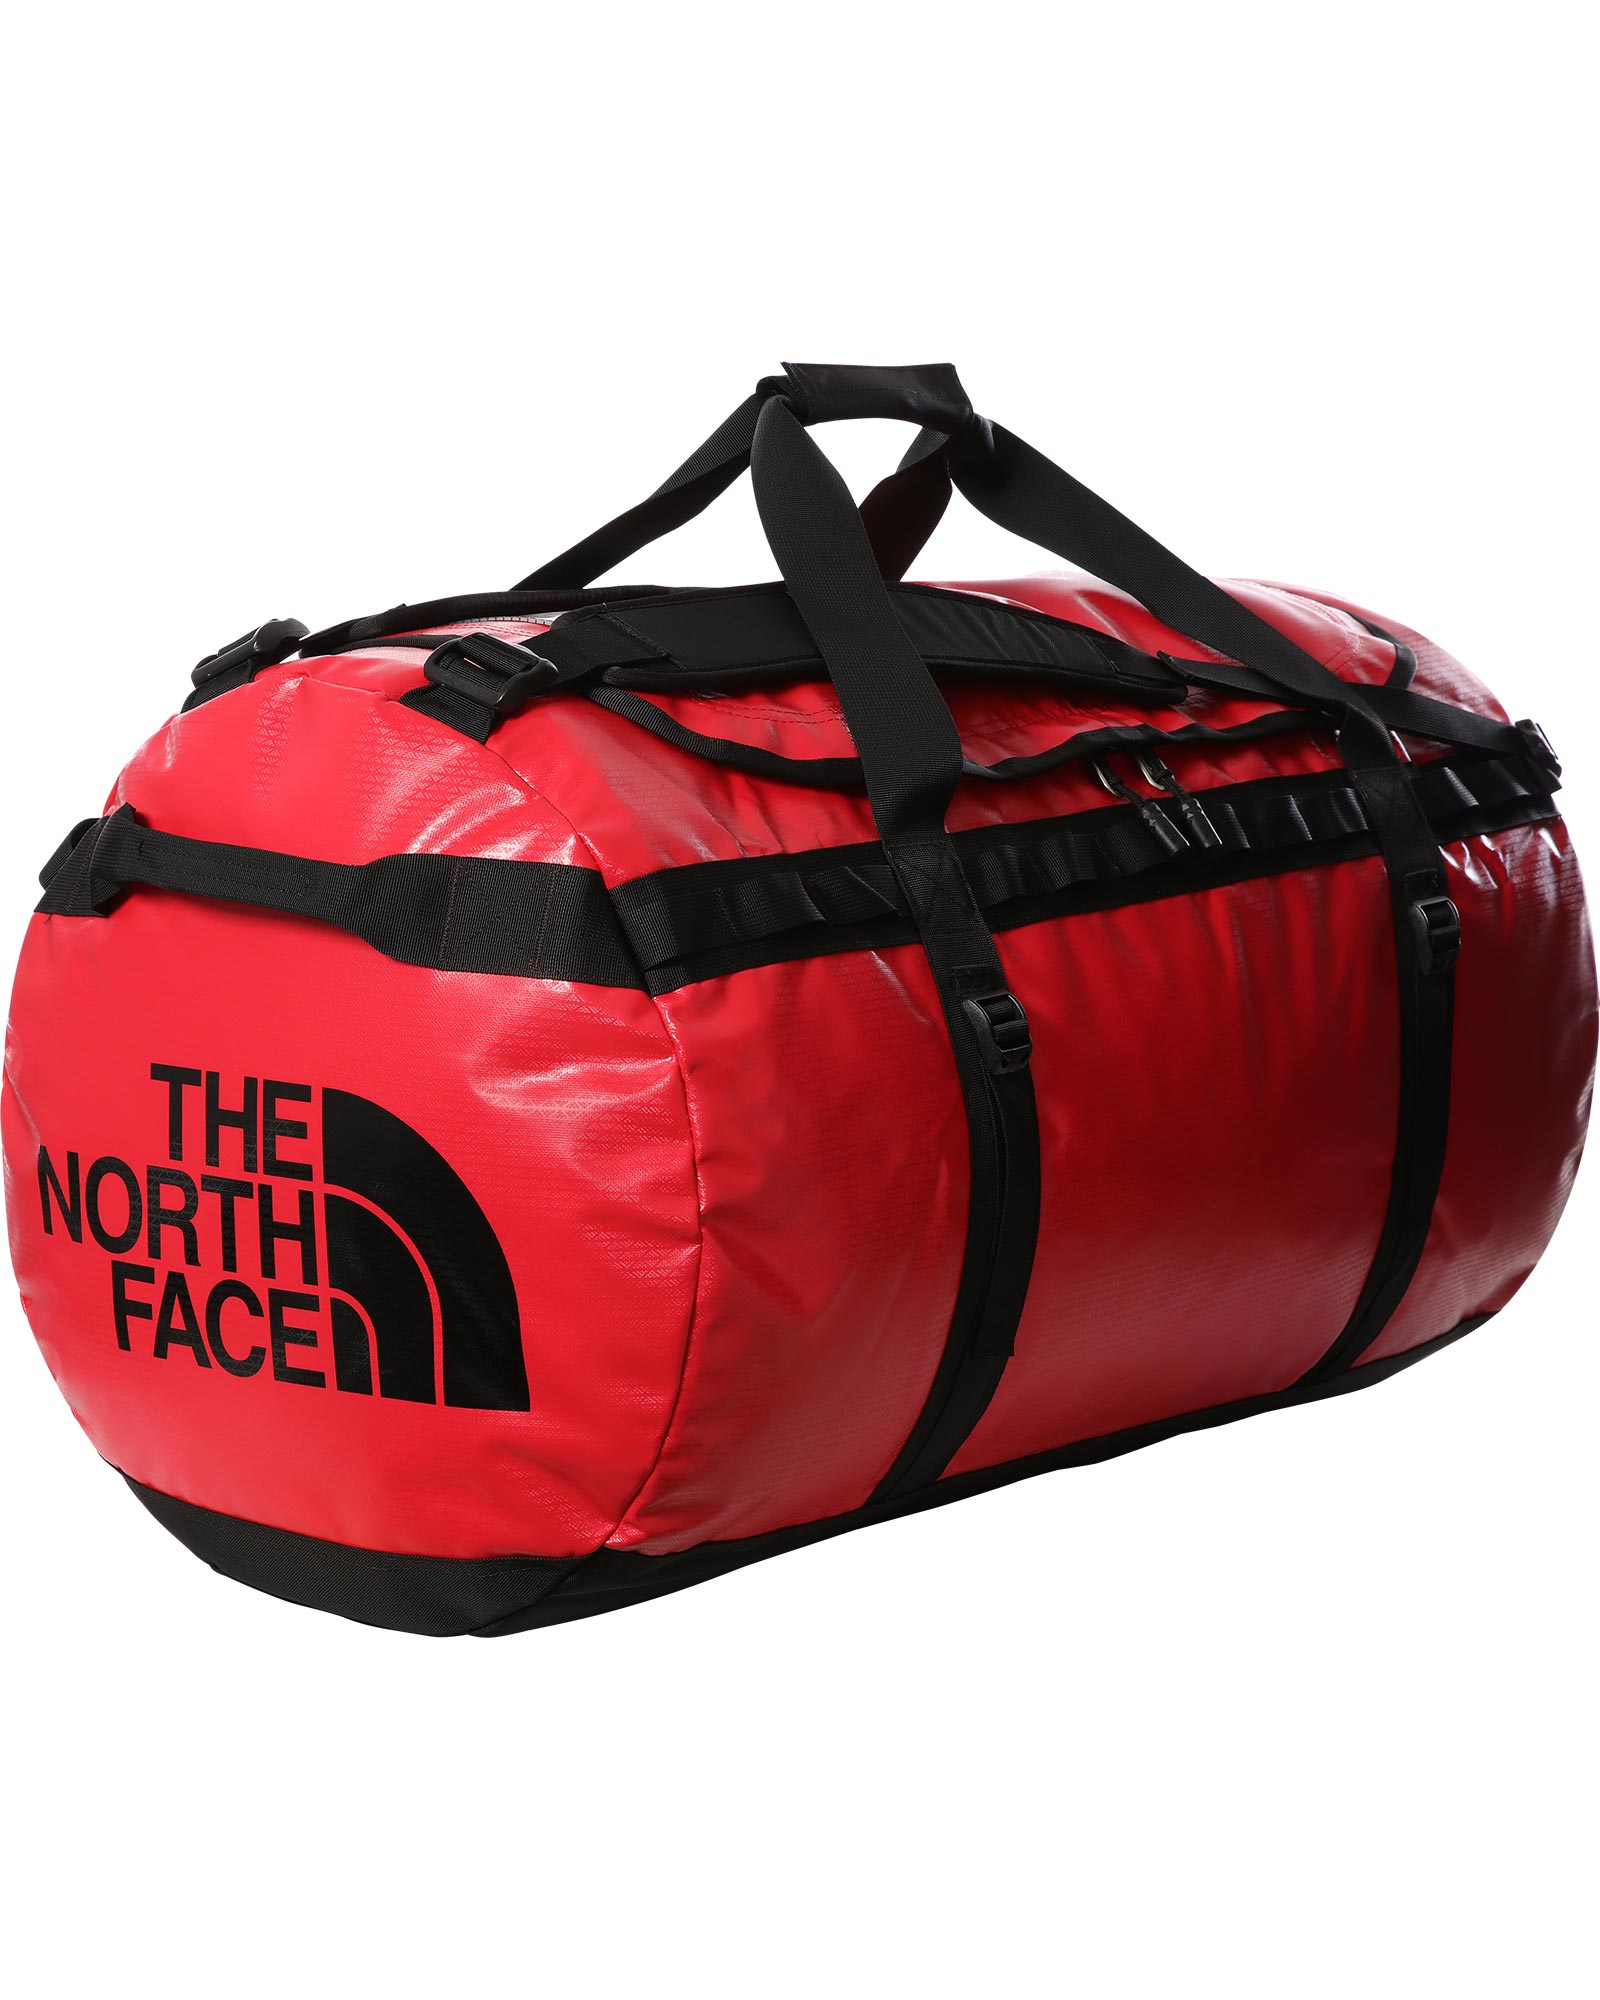 The North Face Base Camp Duffel X Large 132L - TNF Red/TNF Black